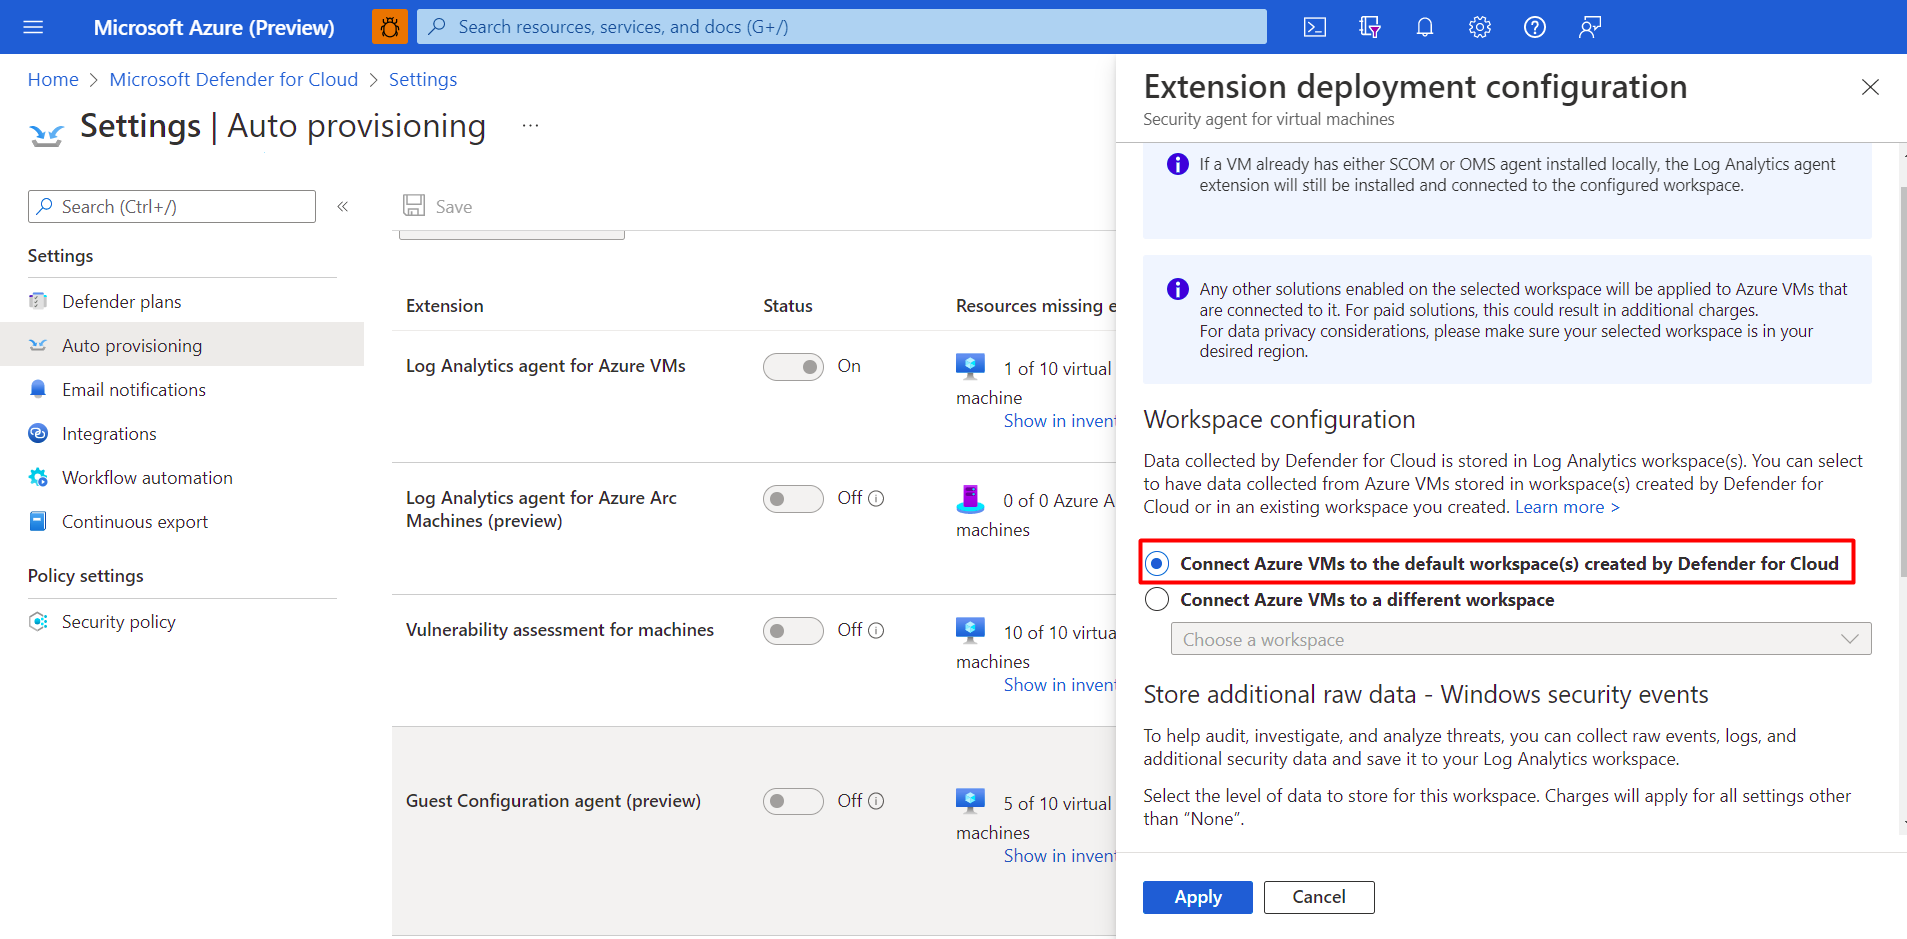 Screenshot showing how to auto provision defender for cloud to manage your workspaces.